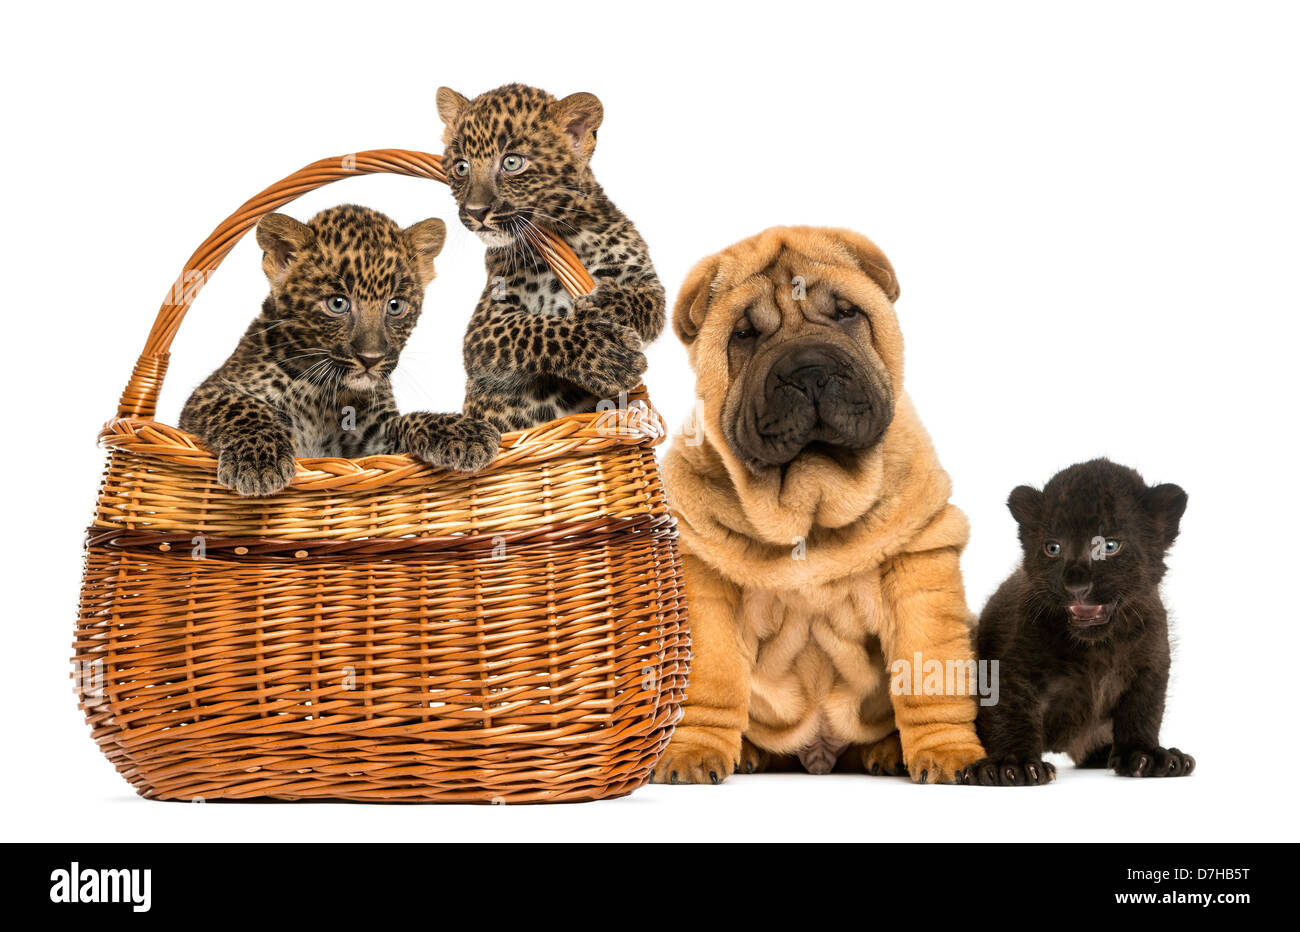 Sharpei puppy with Black Leopard cub and Spotted Leopards cubs in a wicker basket against white background Stock Photo